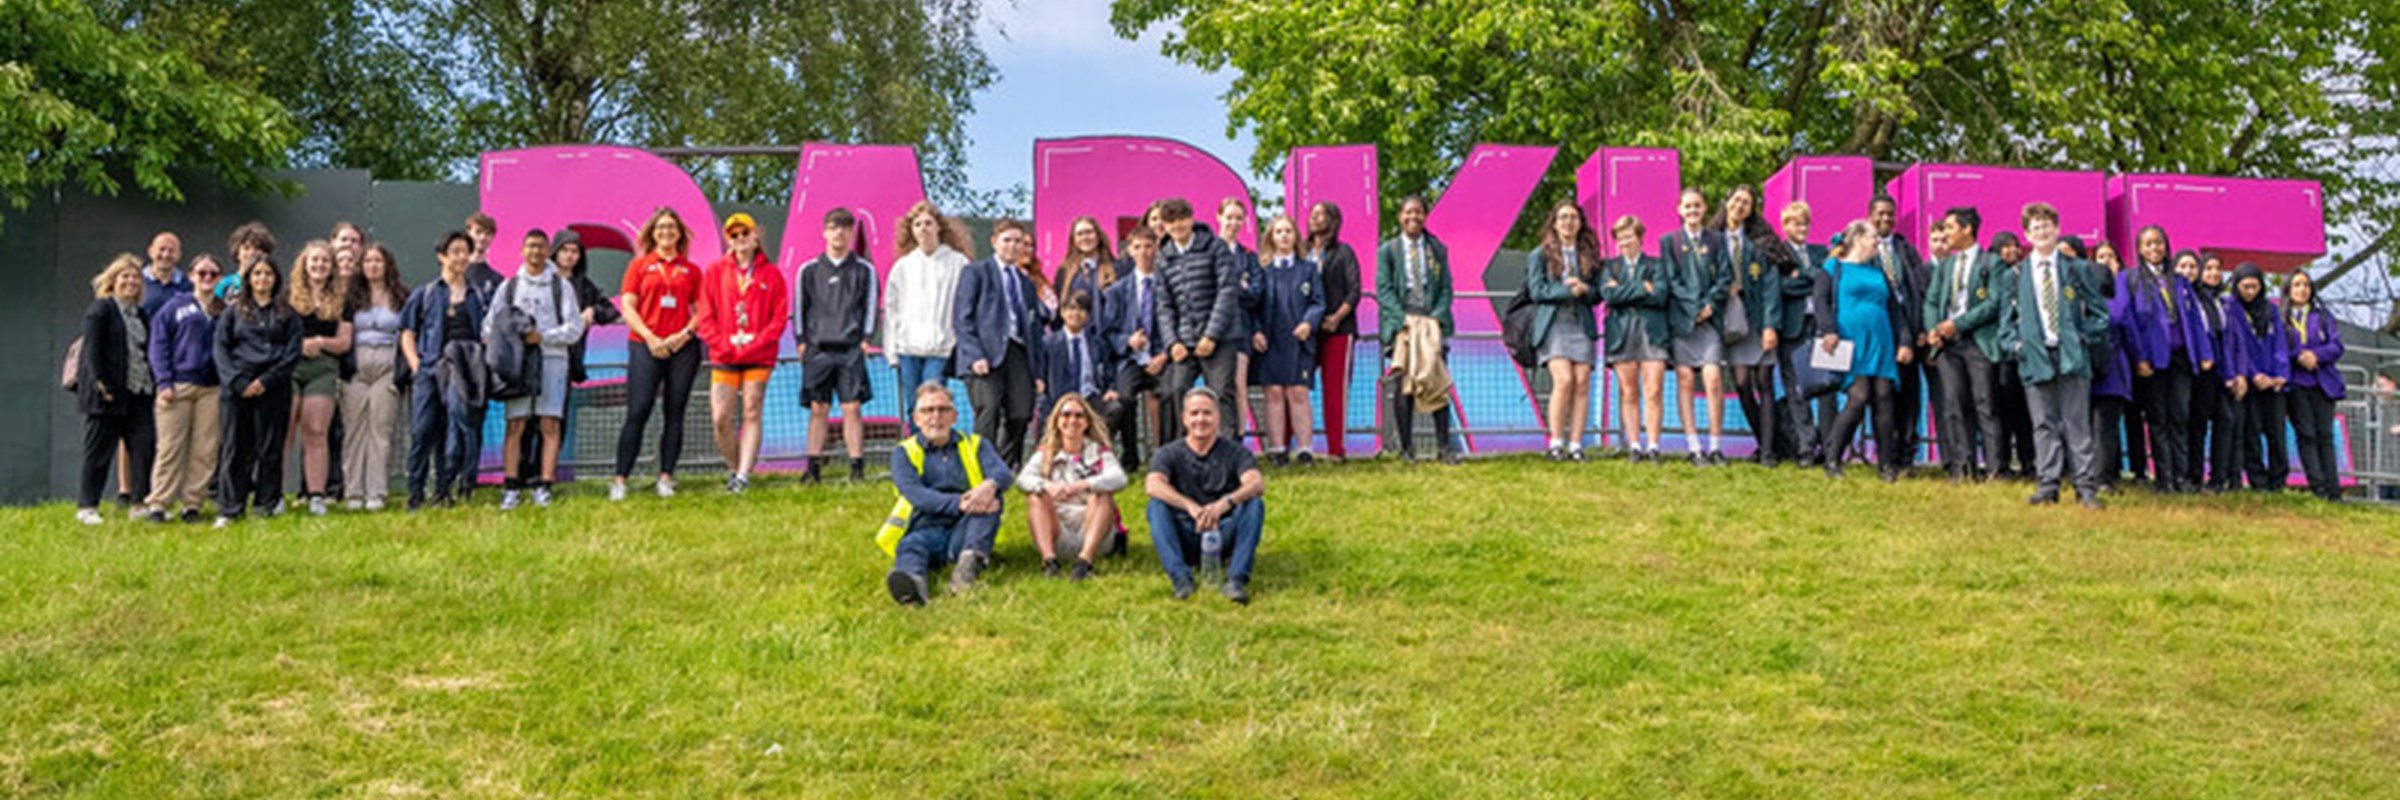 School pupils, teachers, Sacha Lord and Parklife team in front of Parklife sign at the festival